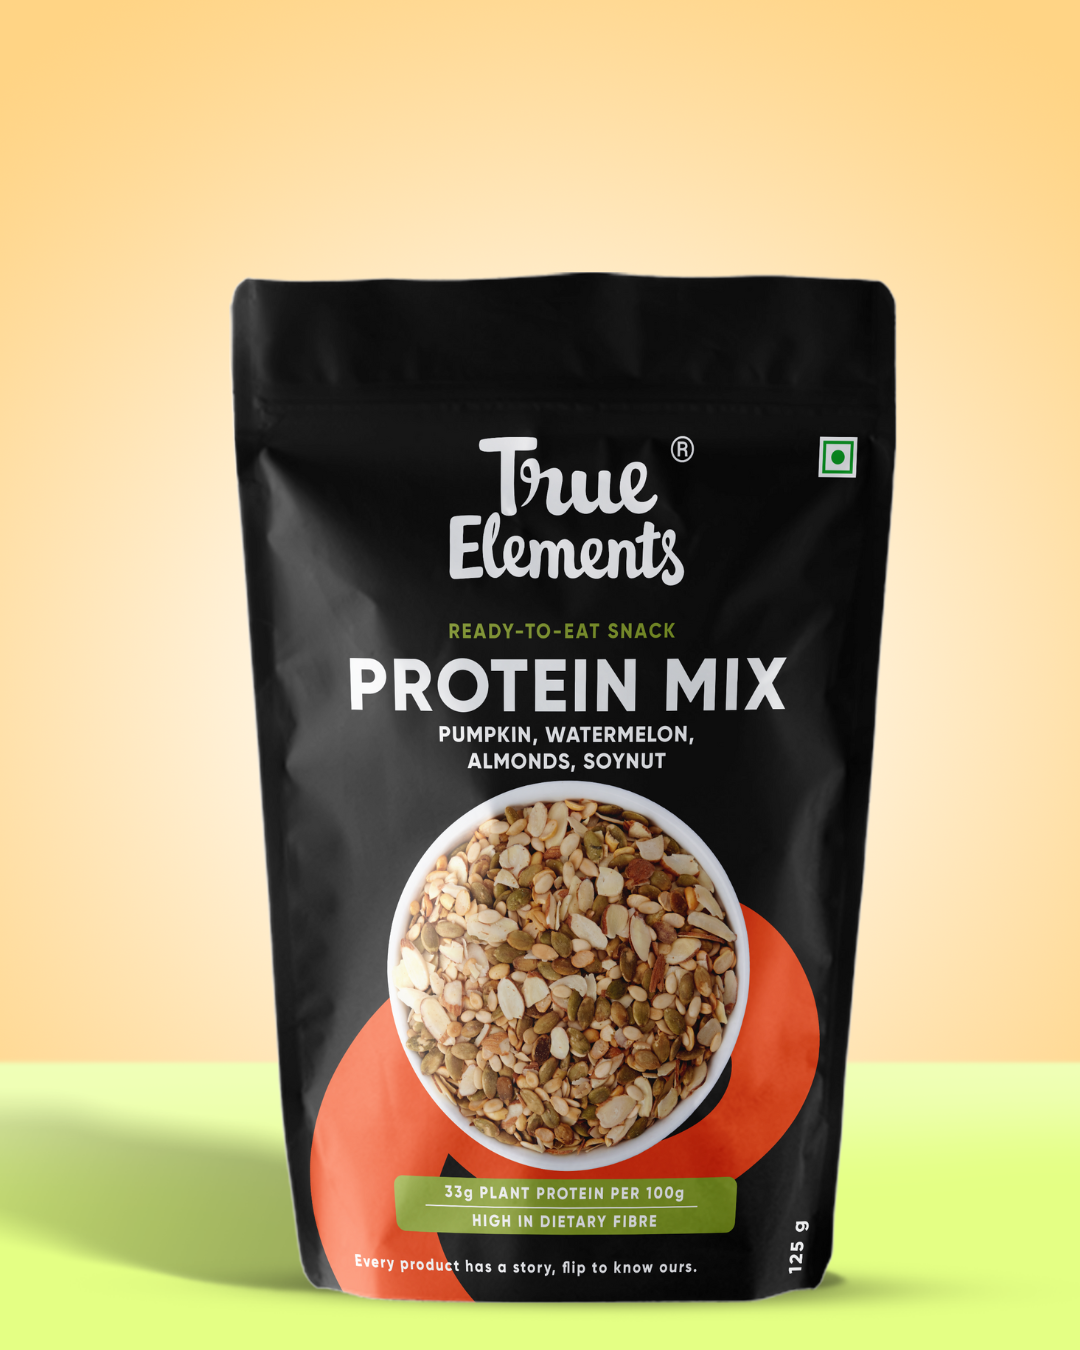 Protein mix with pumpkin, watermelon, almonds & soy in 125g pouch.